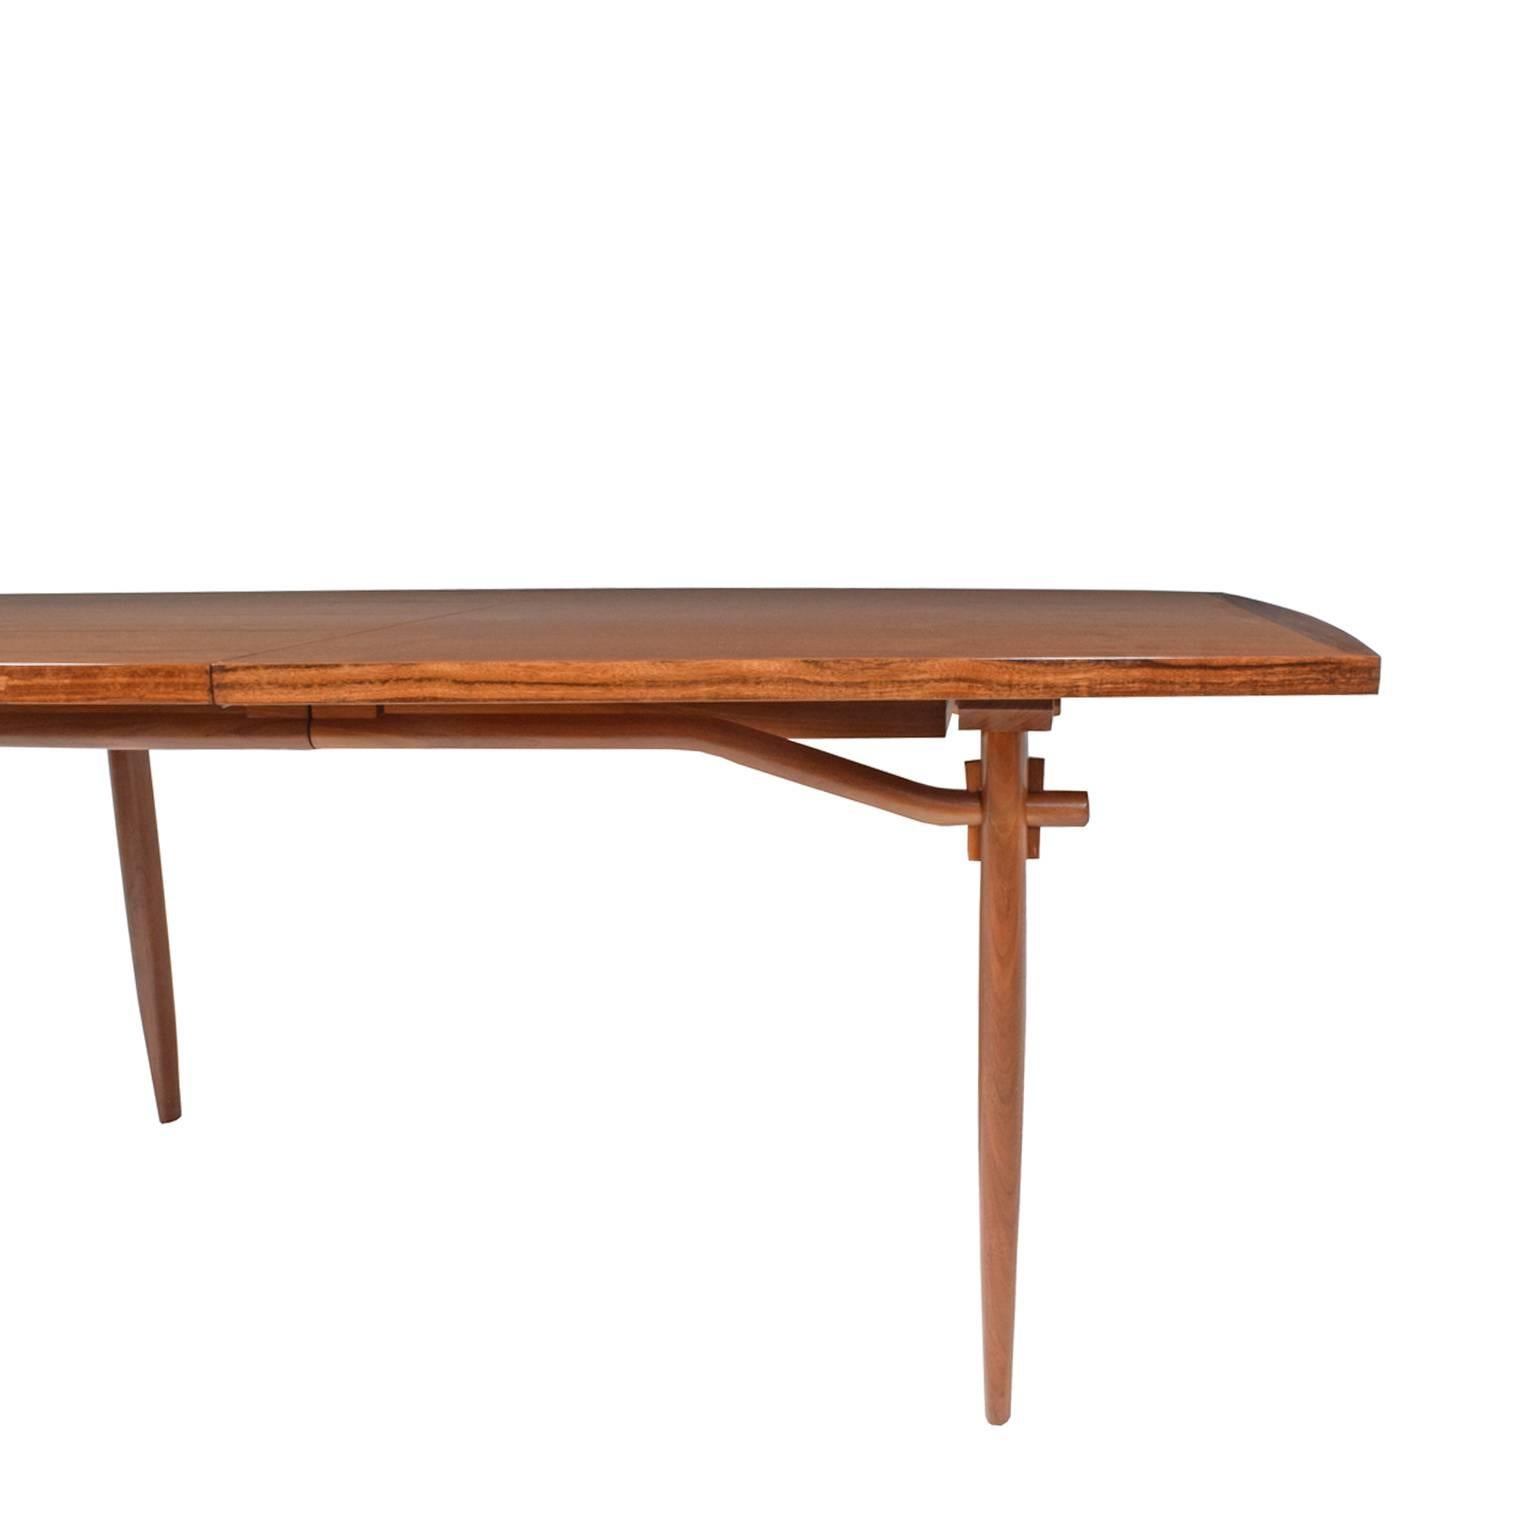 American Dining Table # 202-W by George Nakashima for Widdicomb